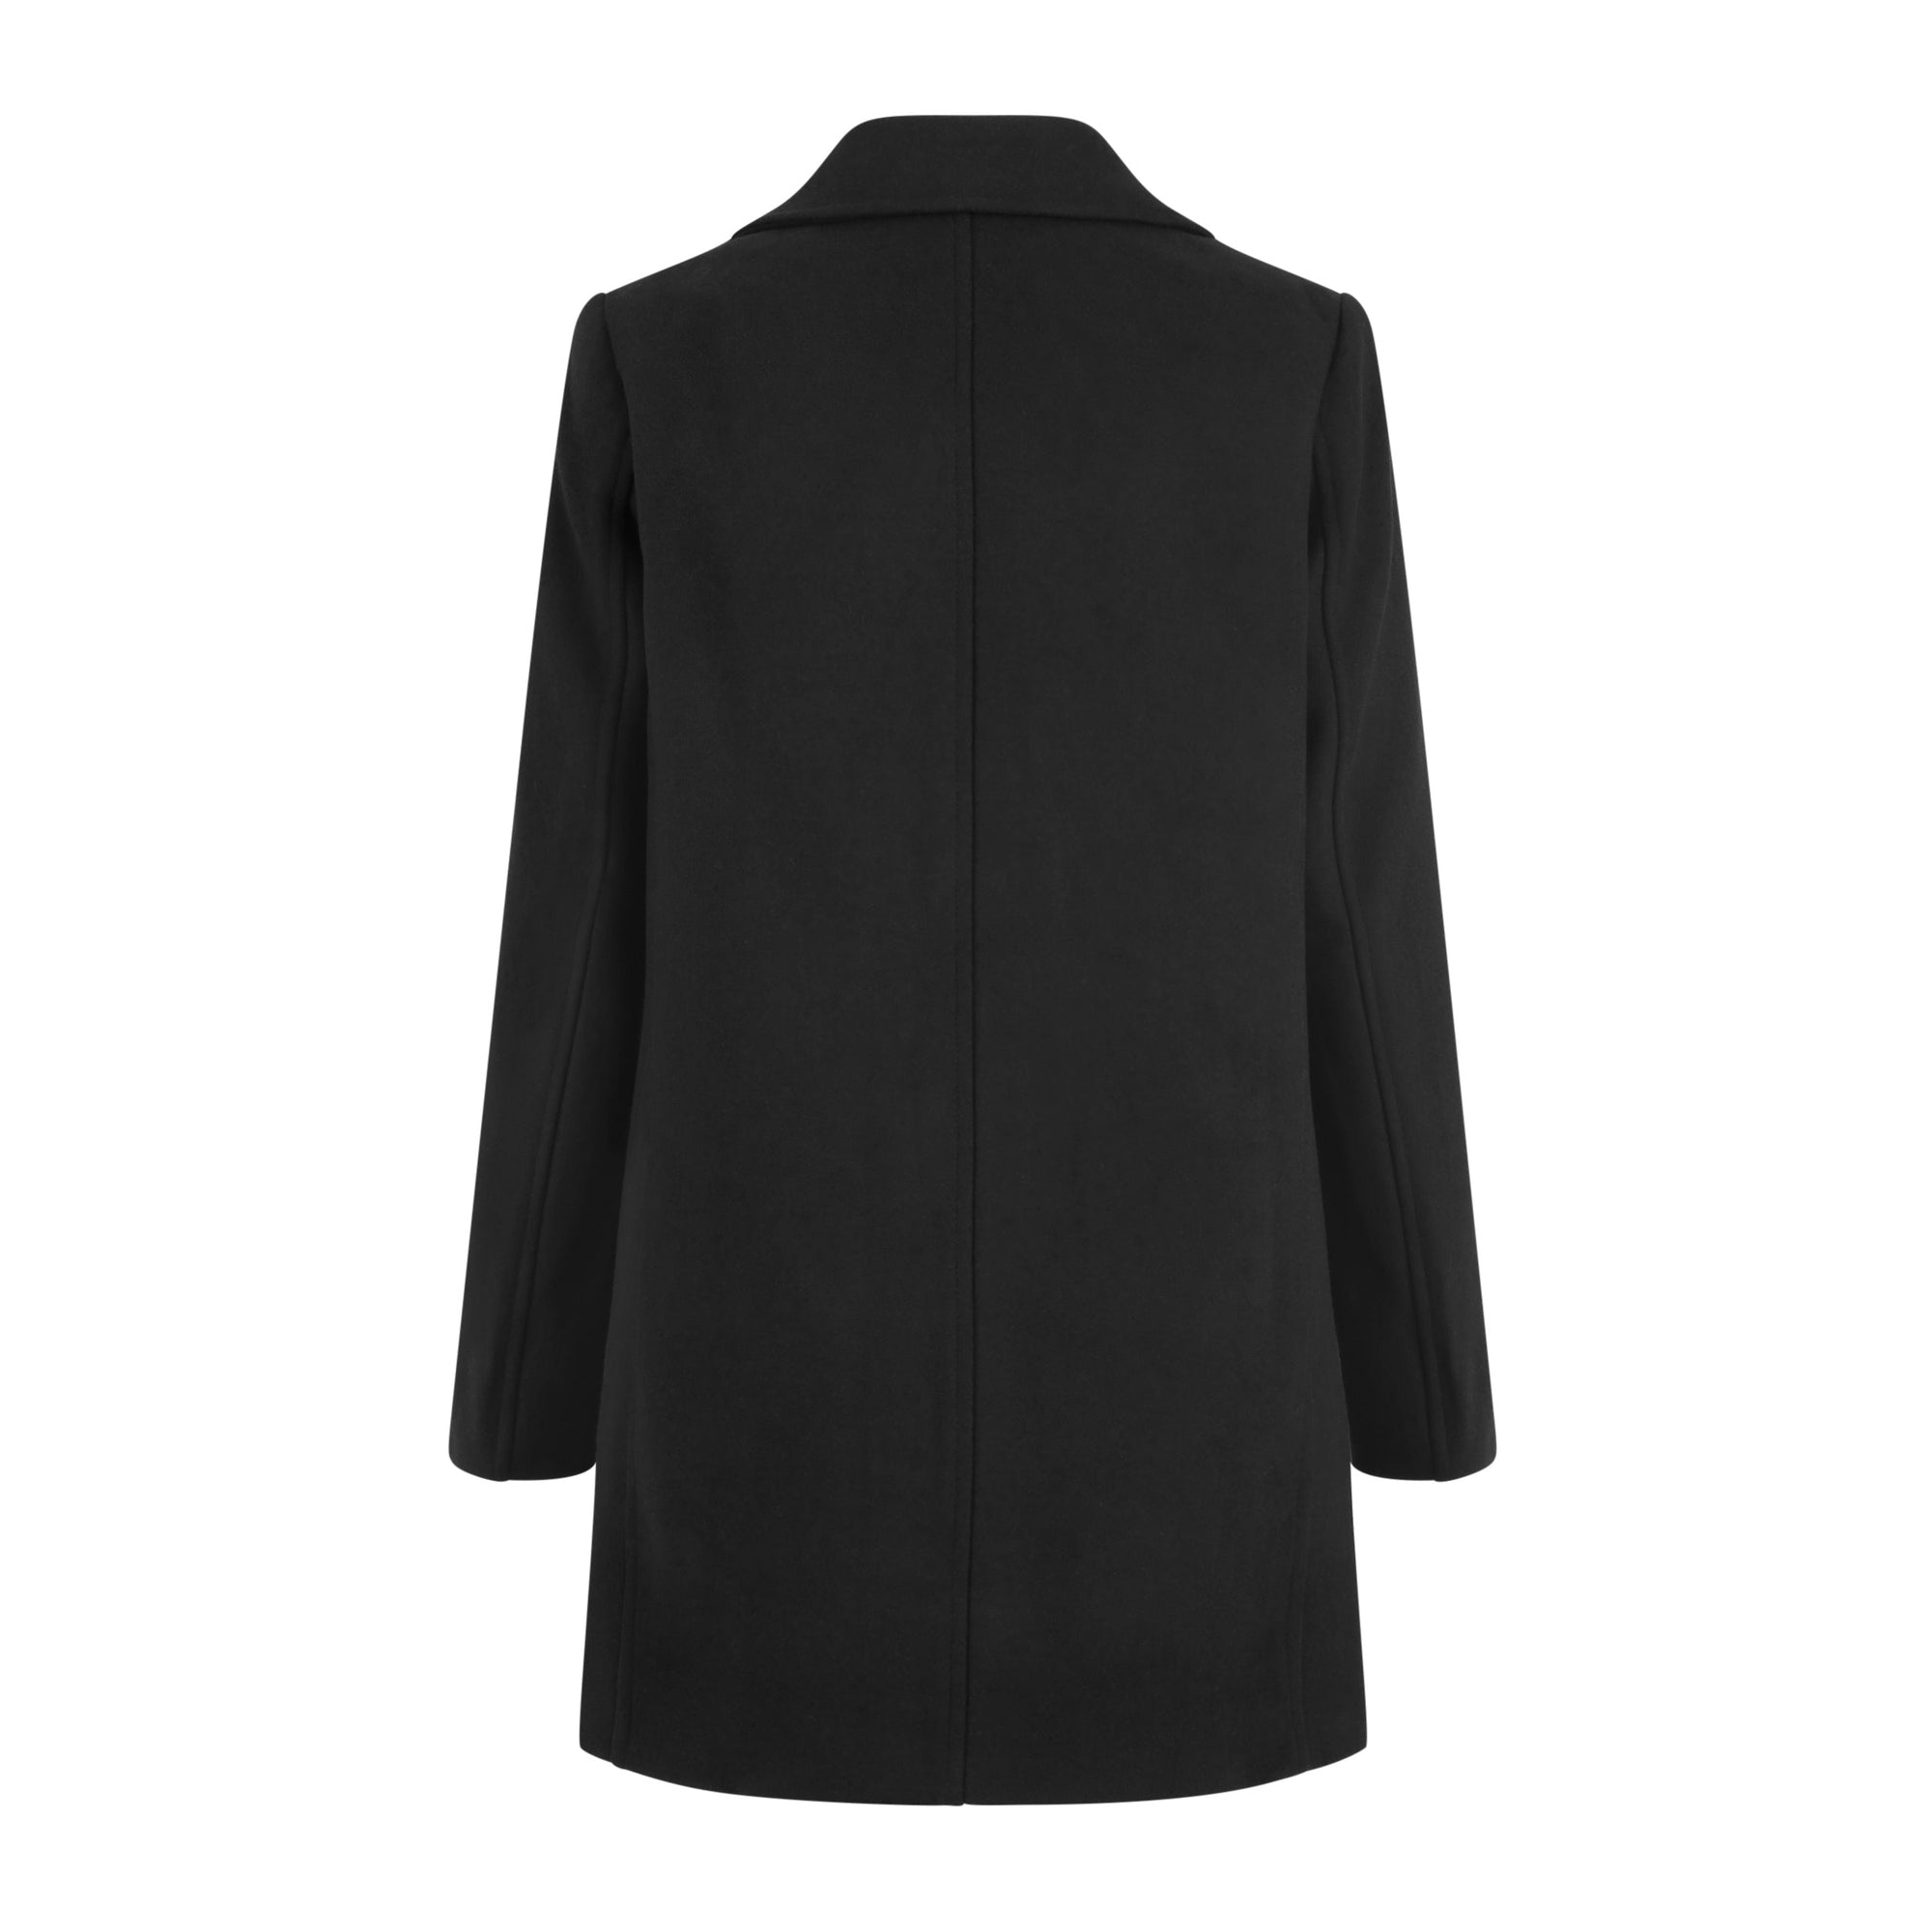 Ladies' Must-Have Elegance Wear Stylish Pea Coat with Three-Breasted  Mid-Length Lapels Pocket at  Women's Clothing store